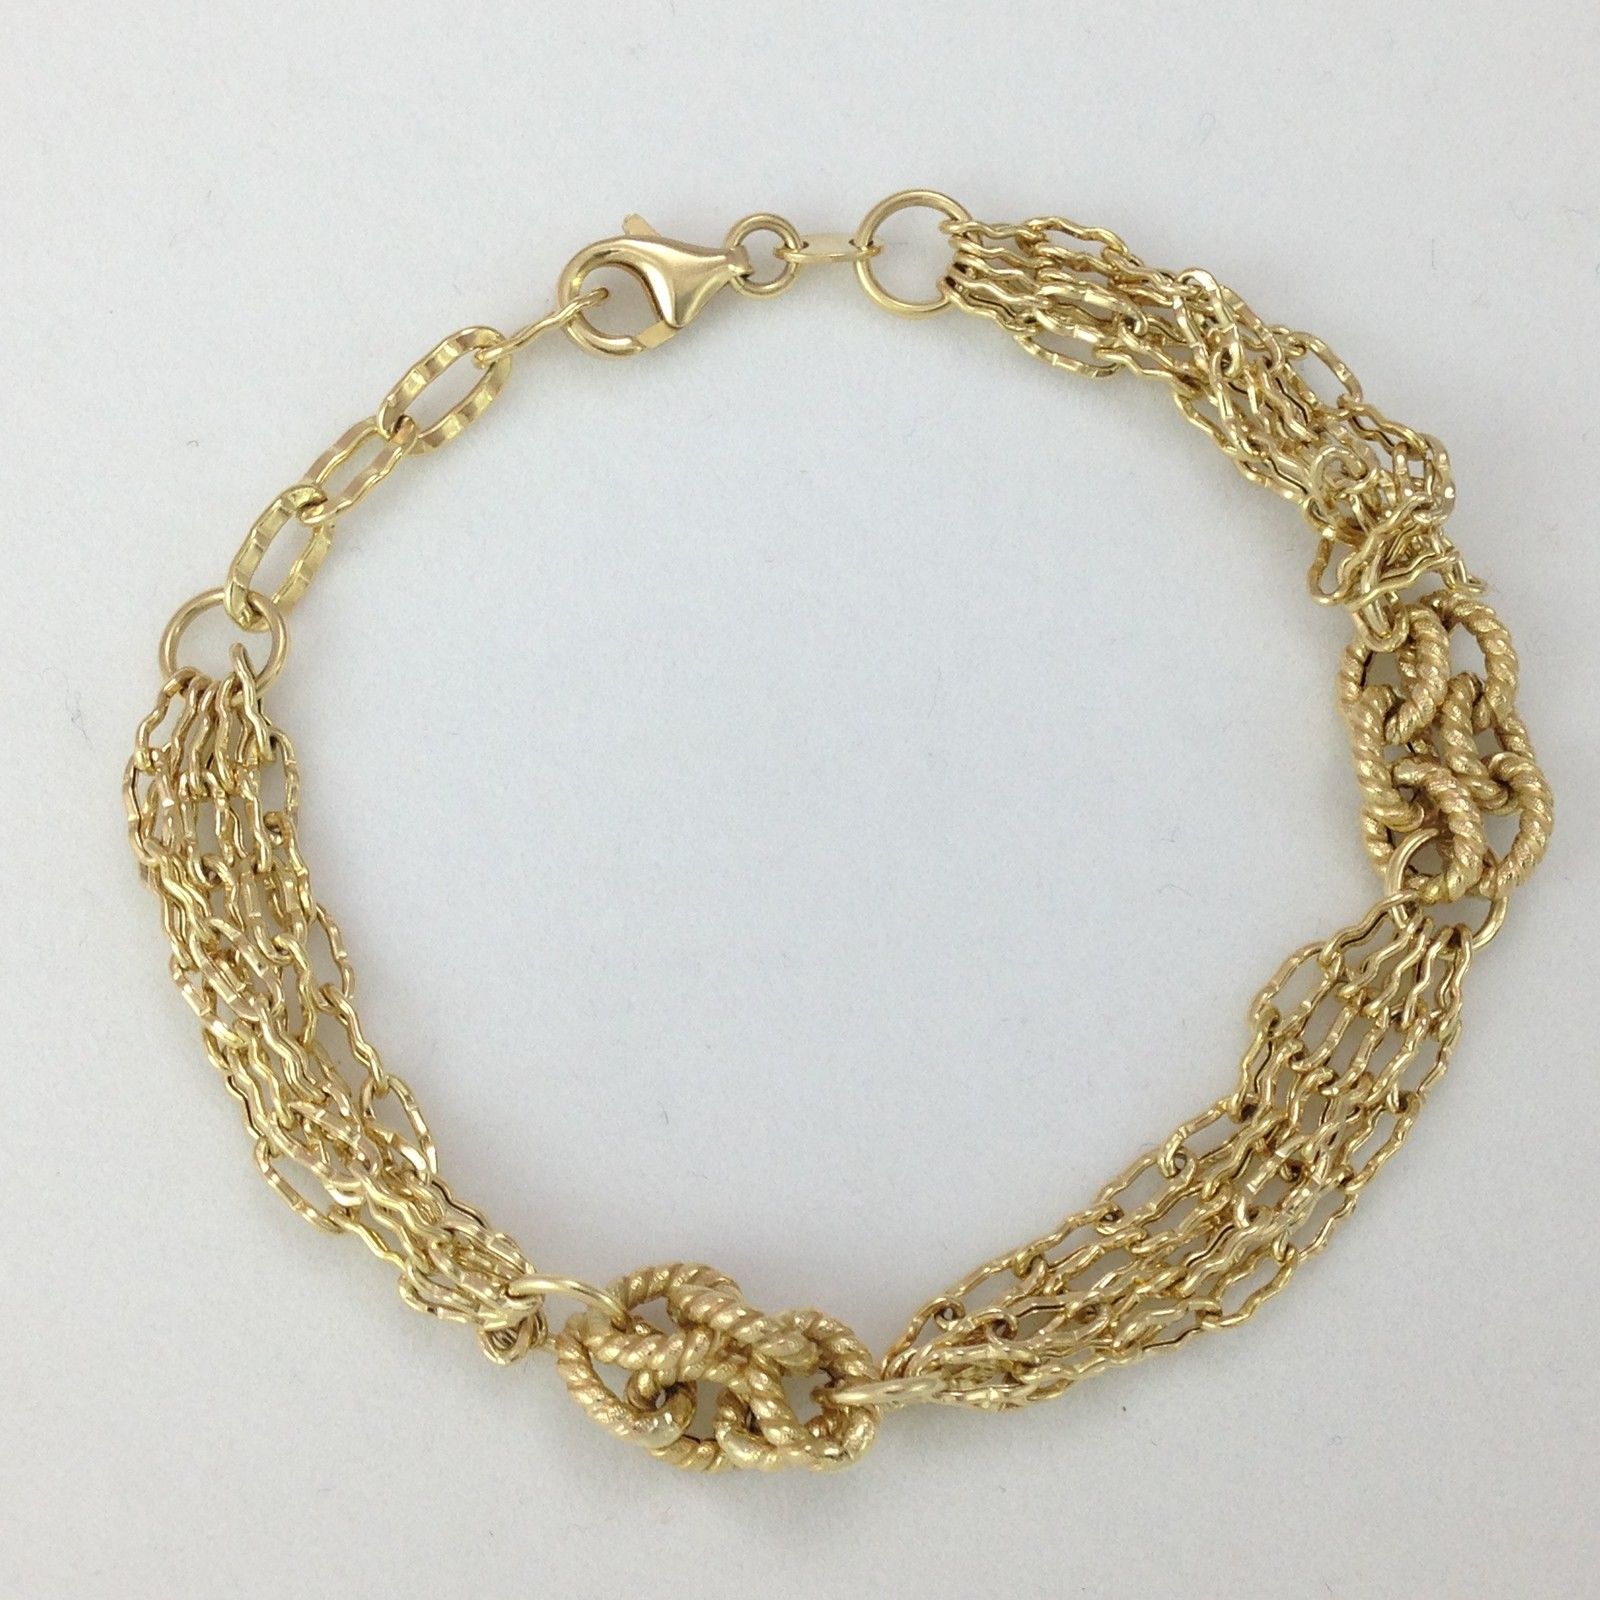 Genuine 14K Yellow Gold Adjustable Bracelet 7-8 inches $775 -  6.8 gr. NWT